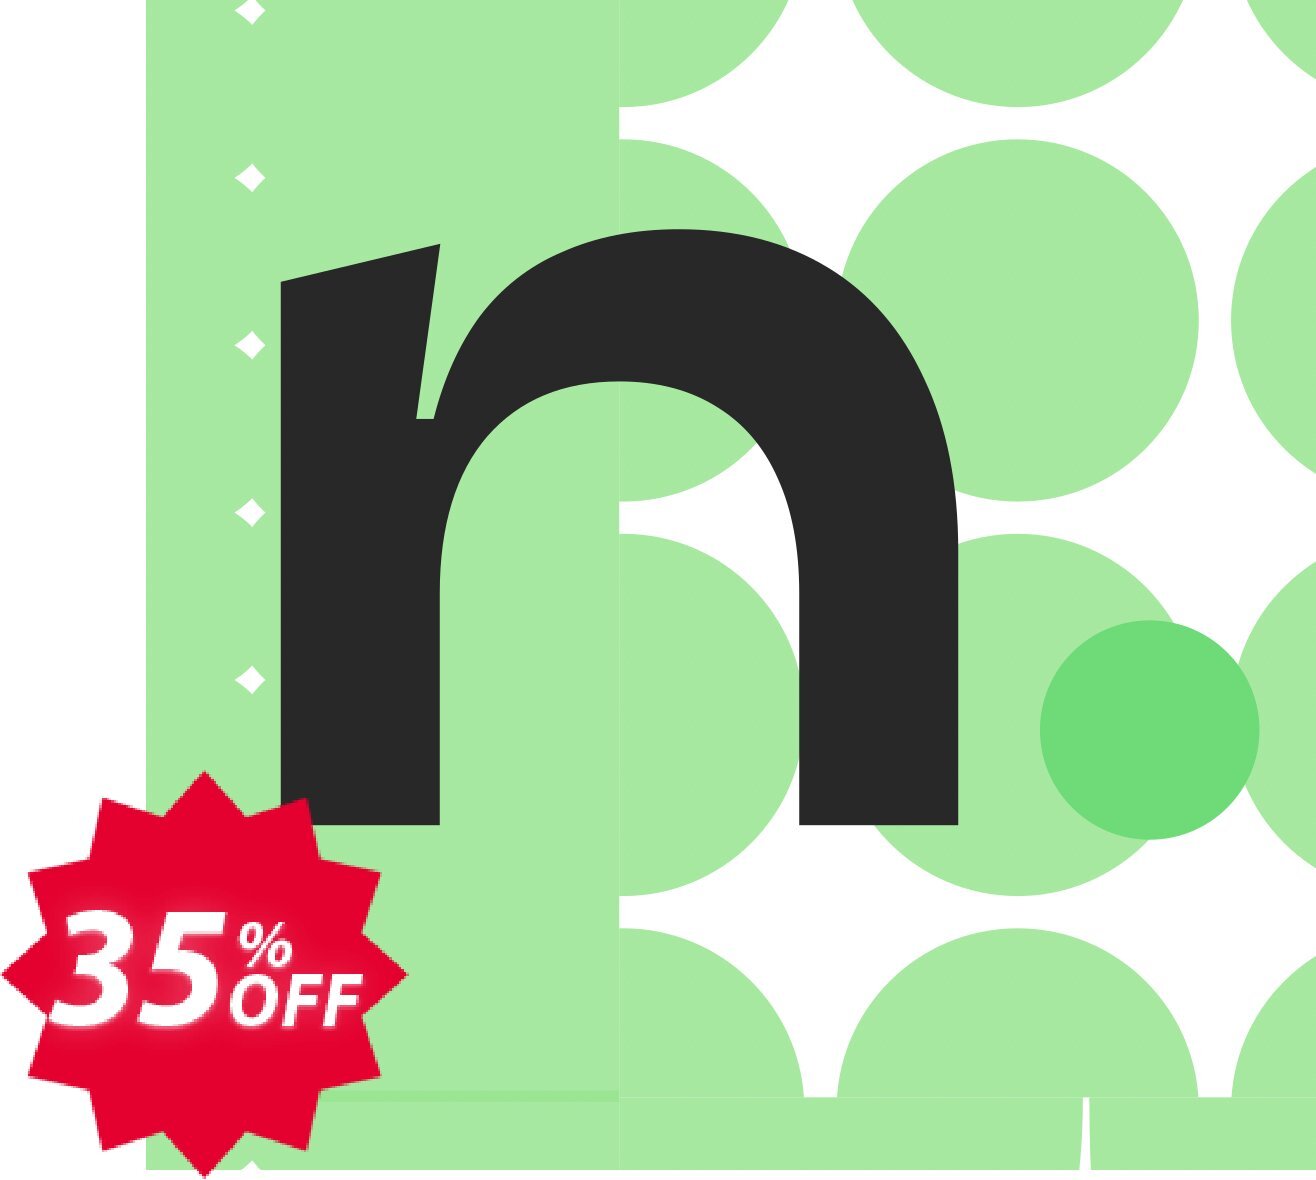 Name.com Domains for Yearly Coupon code 35% discount 